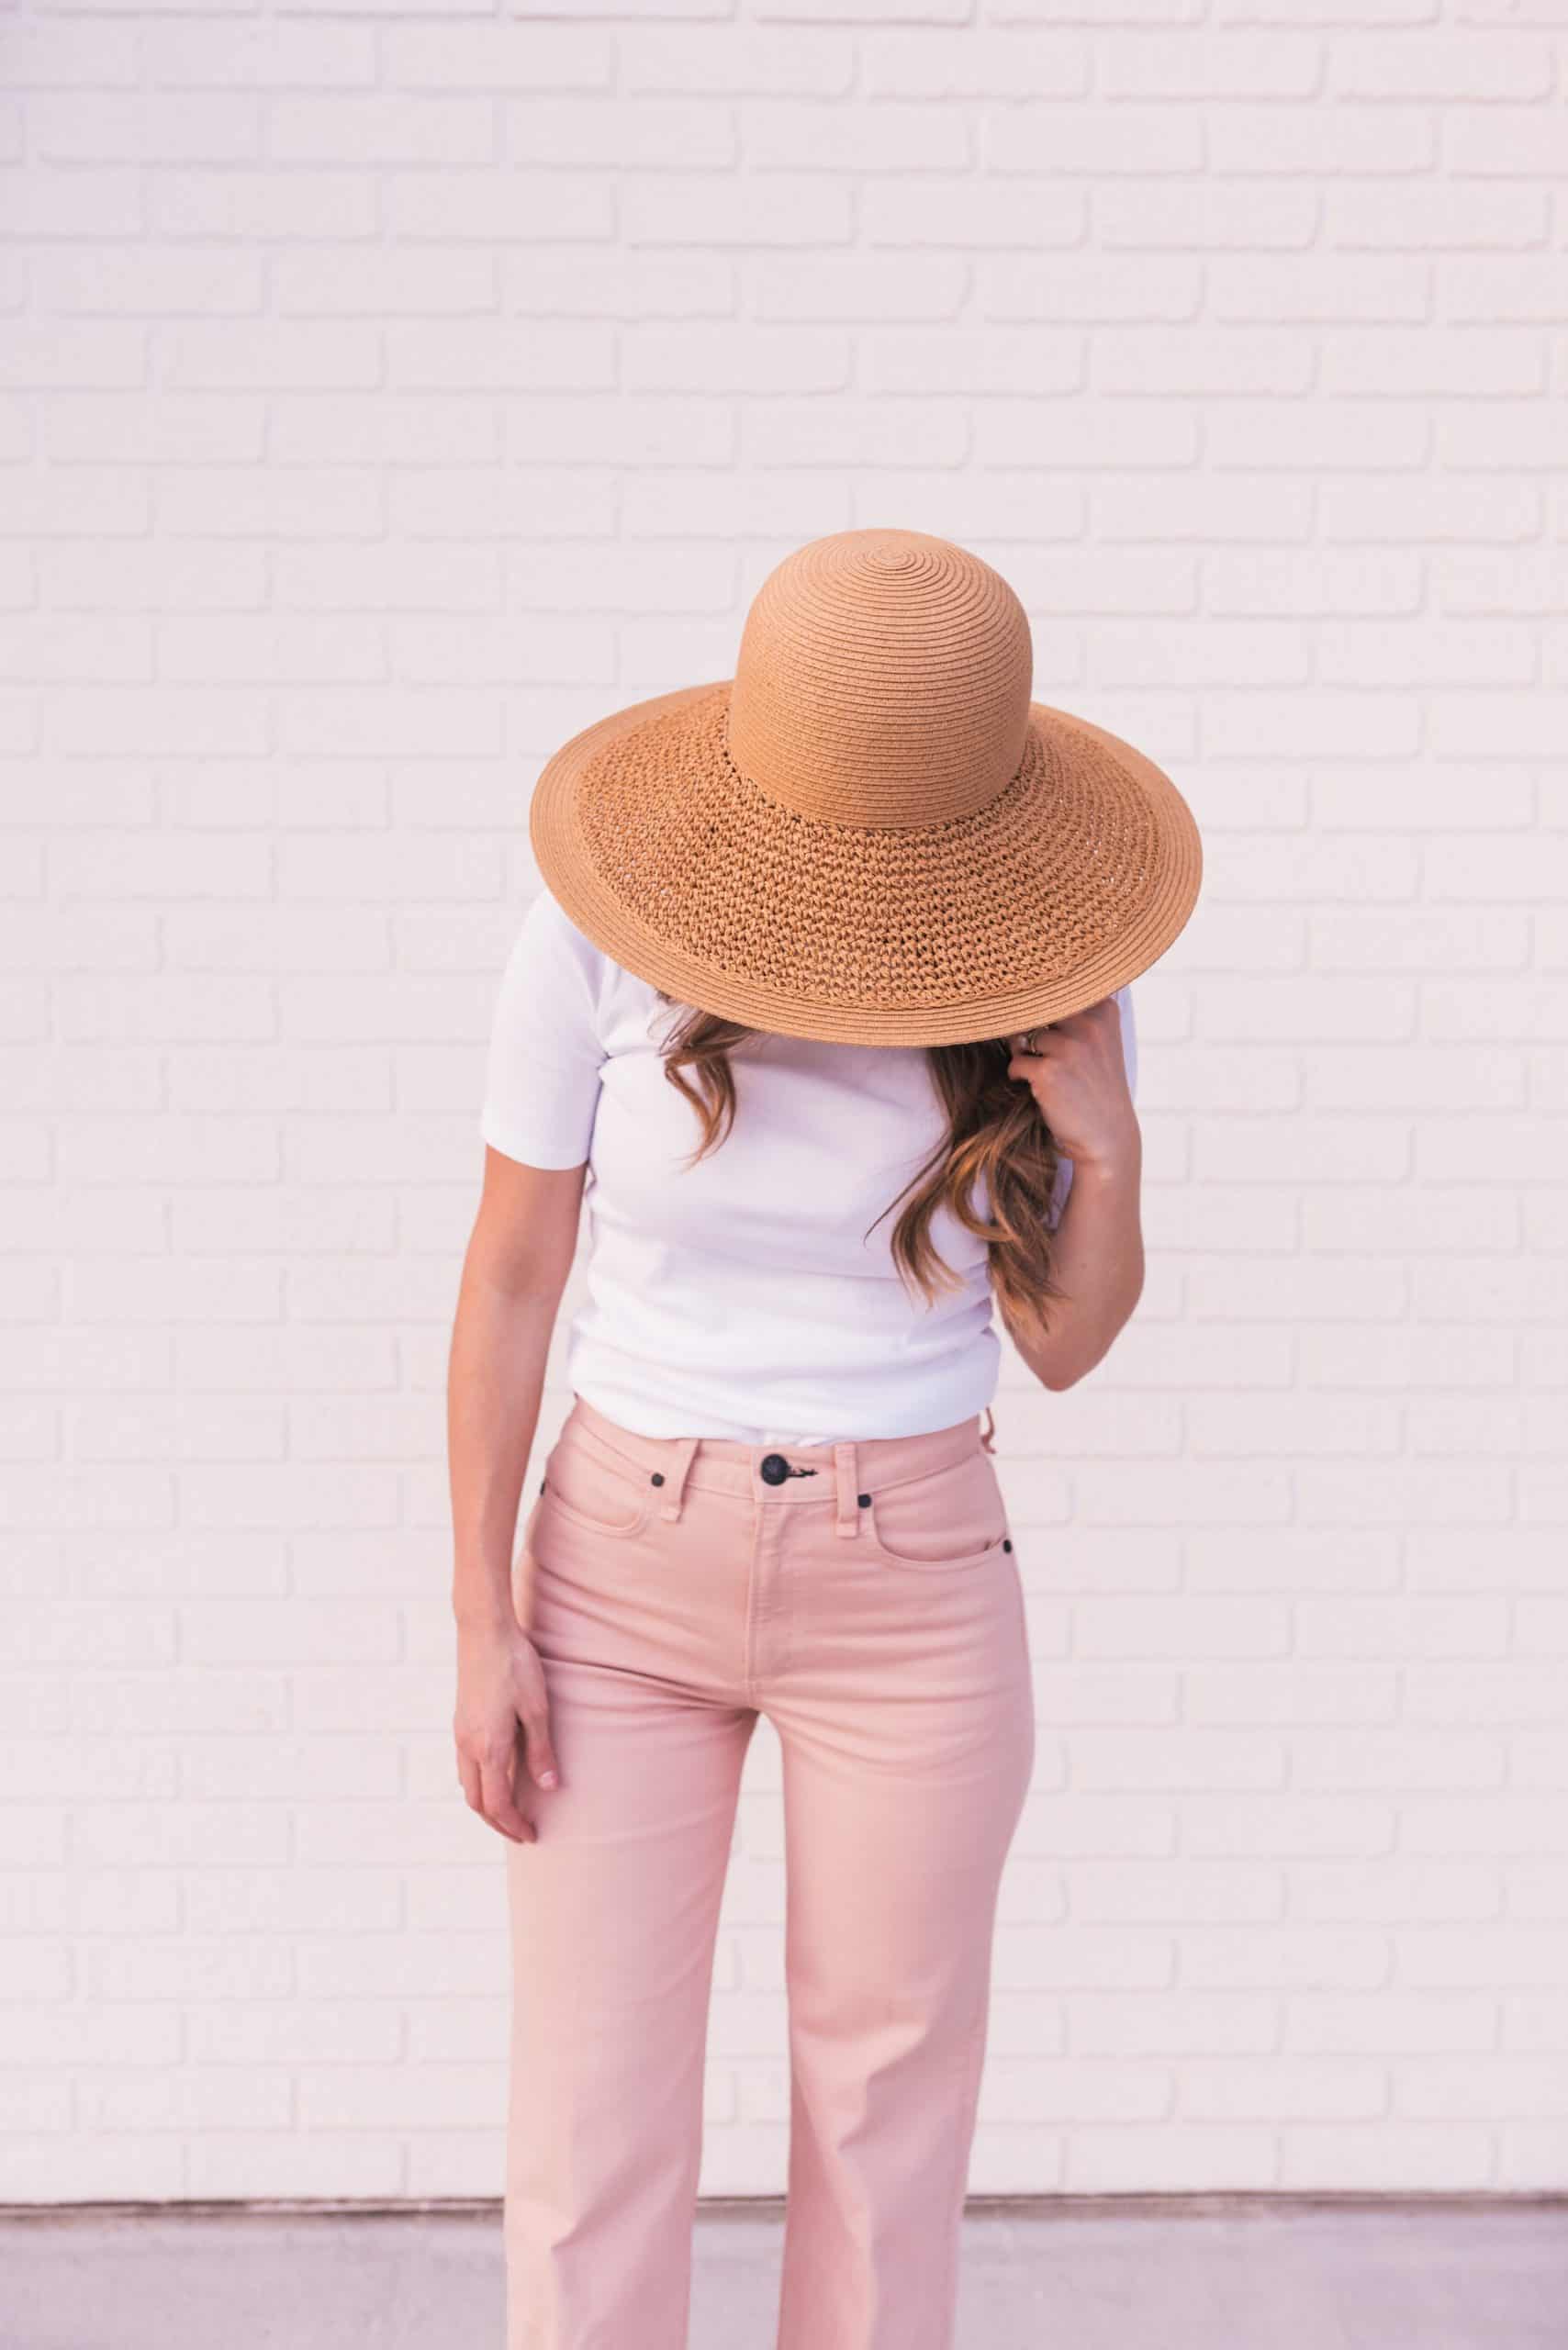 7 clothes you absolutely must have in your closet this summer!